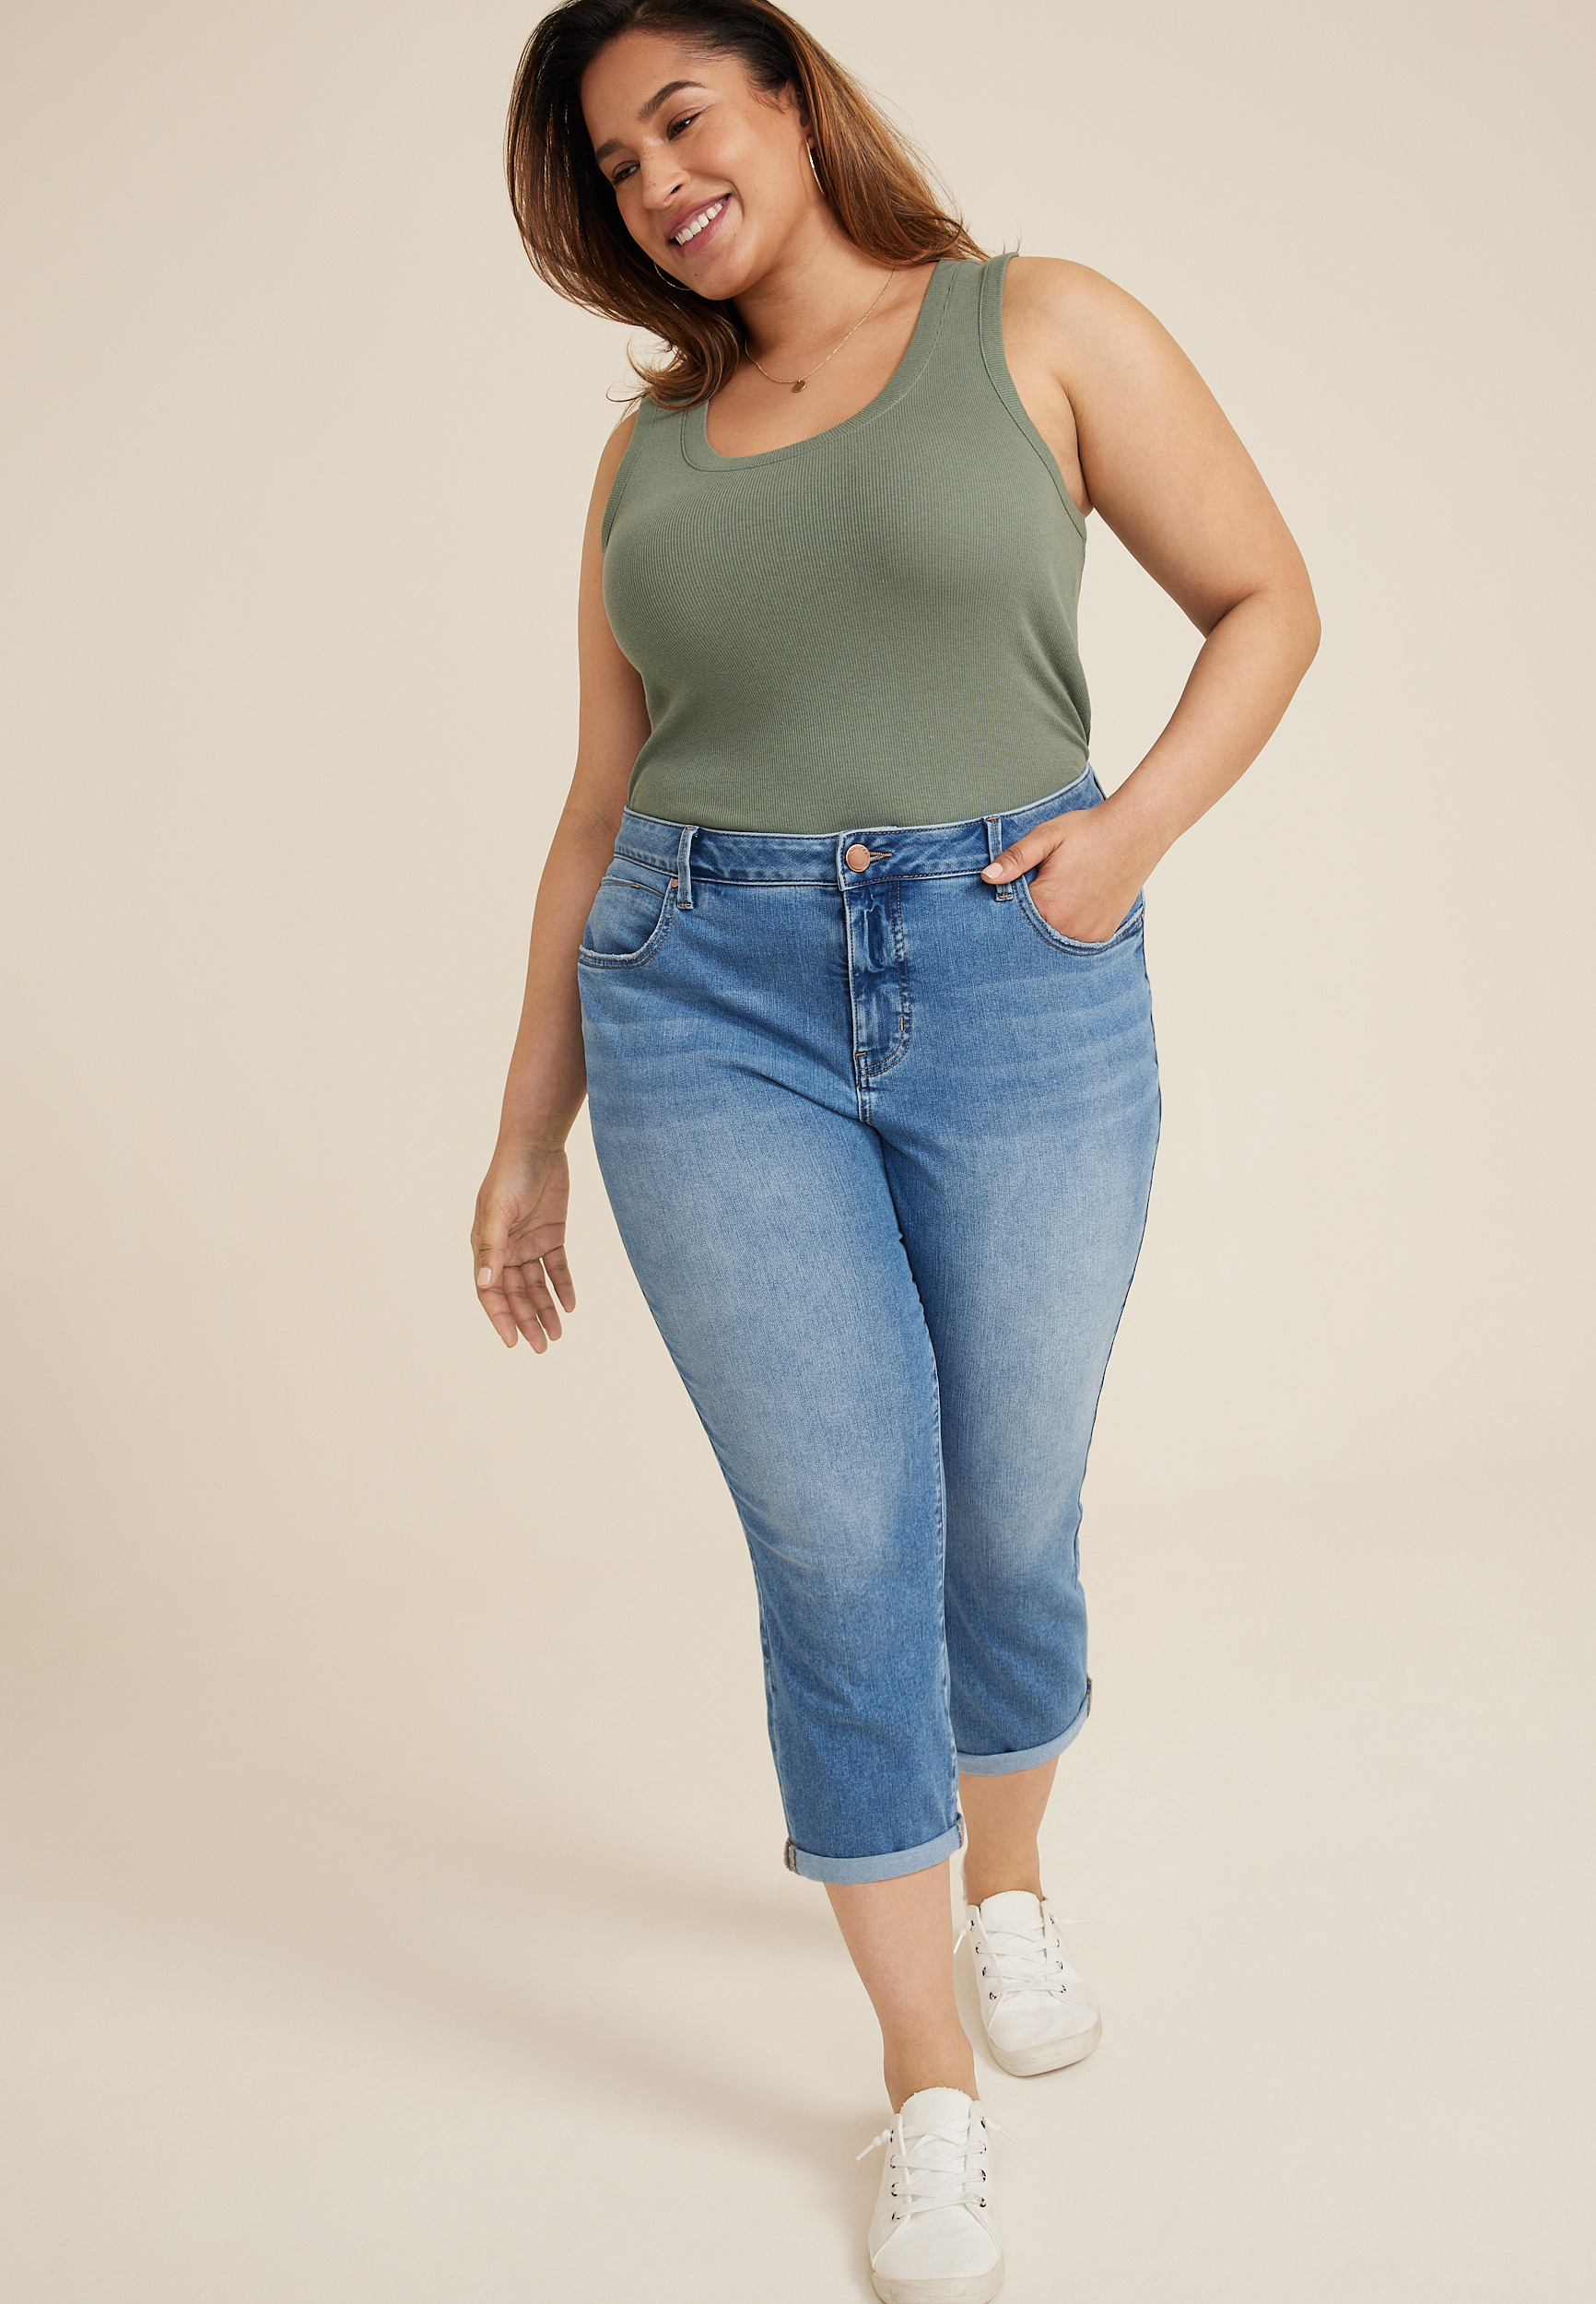 Plus m jeans by maurices™ Everflex™ Curvy High Rise Super Skinny Cropped Jean